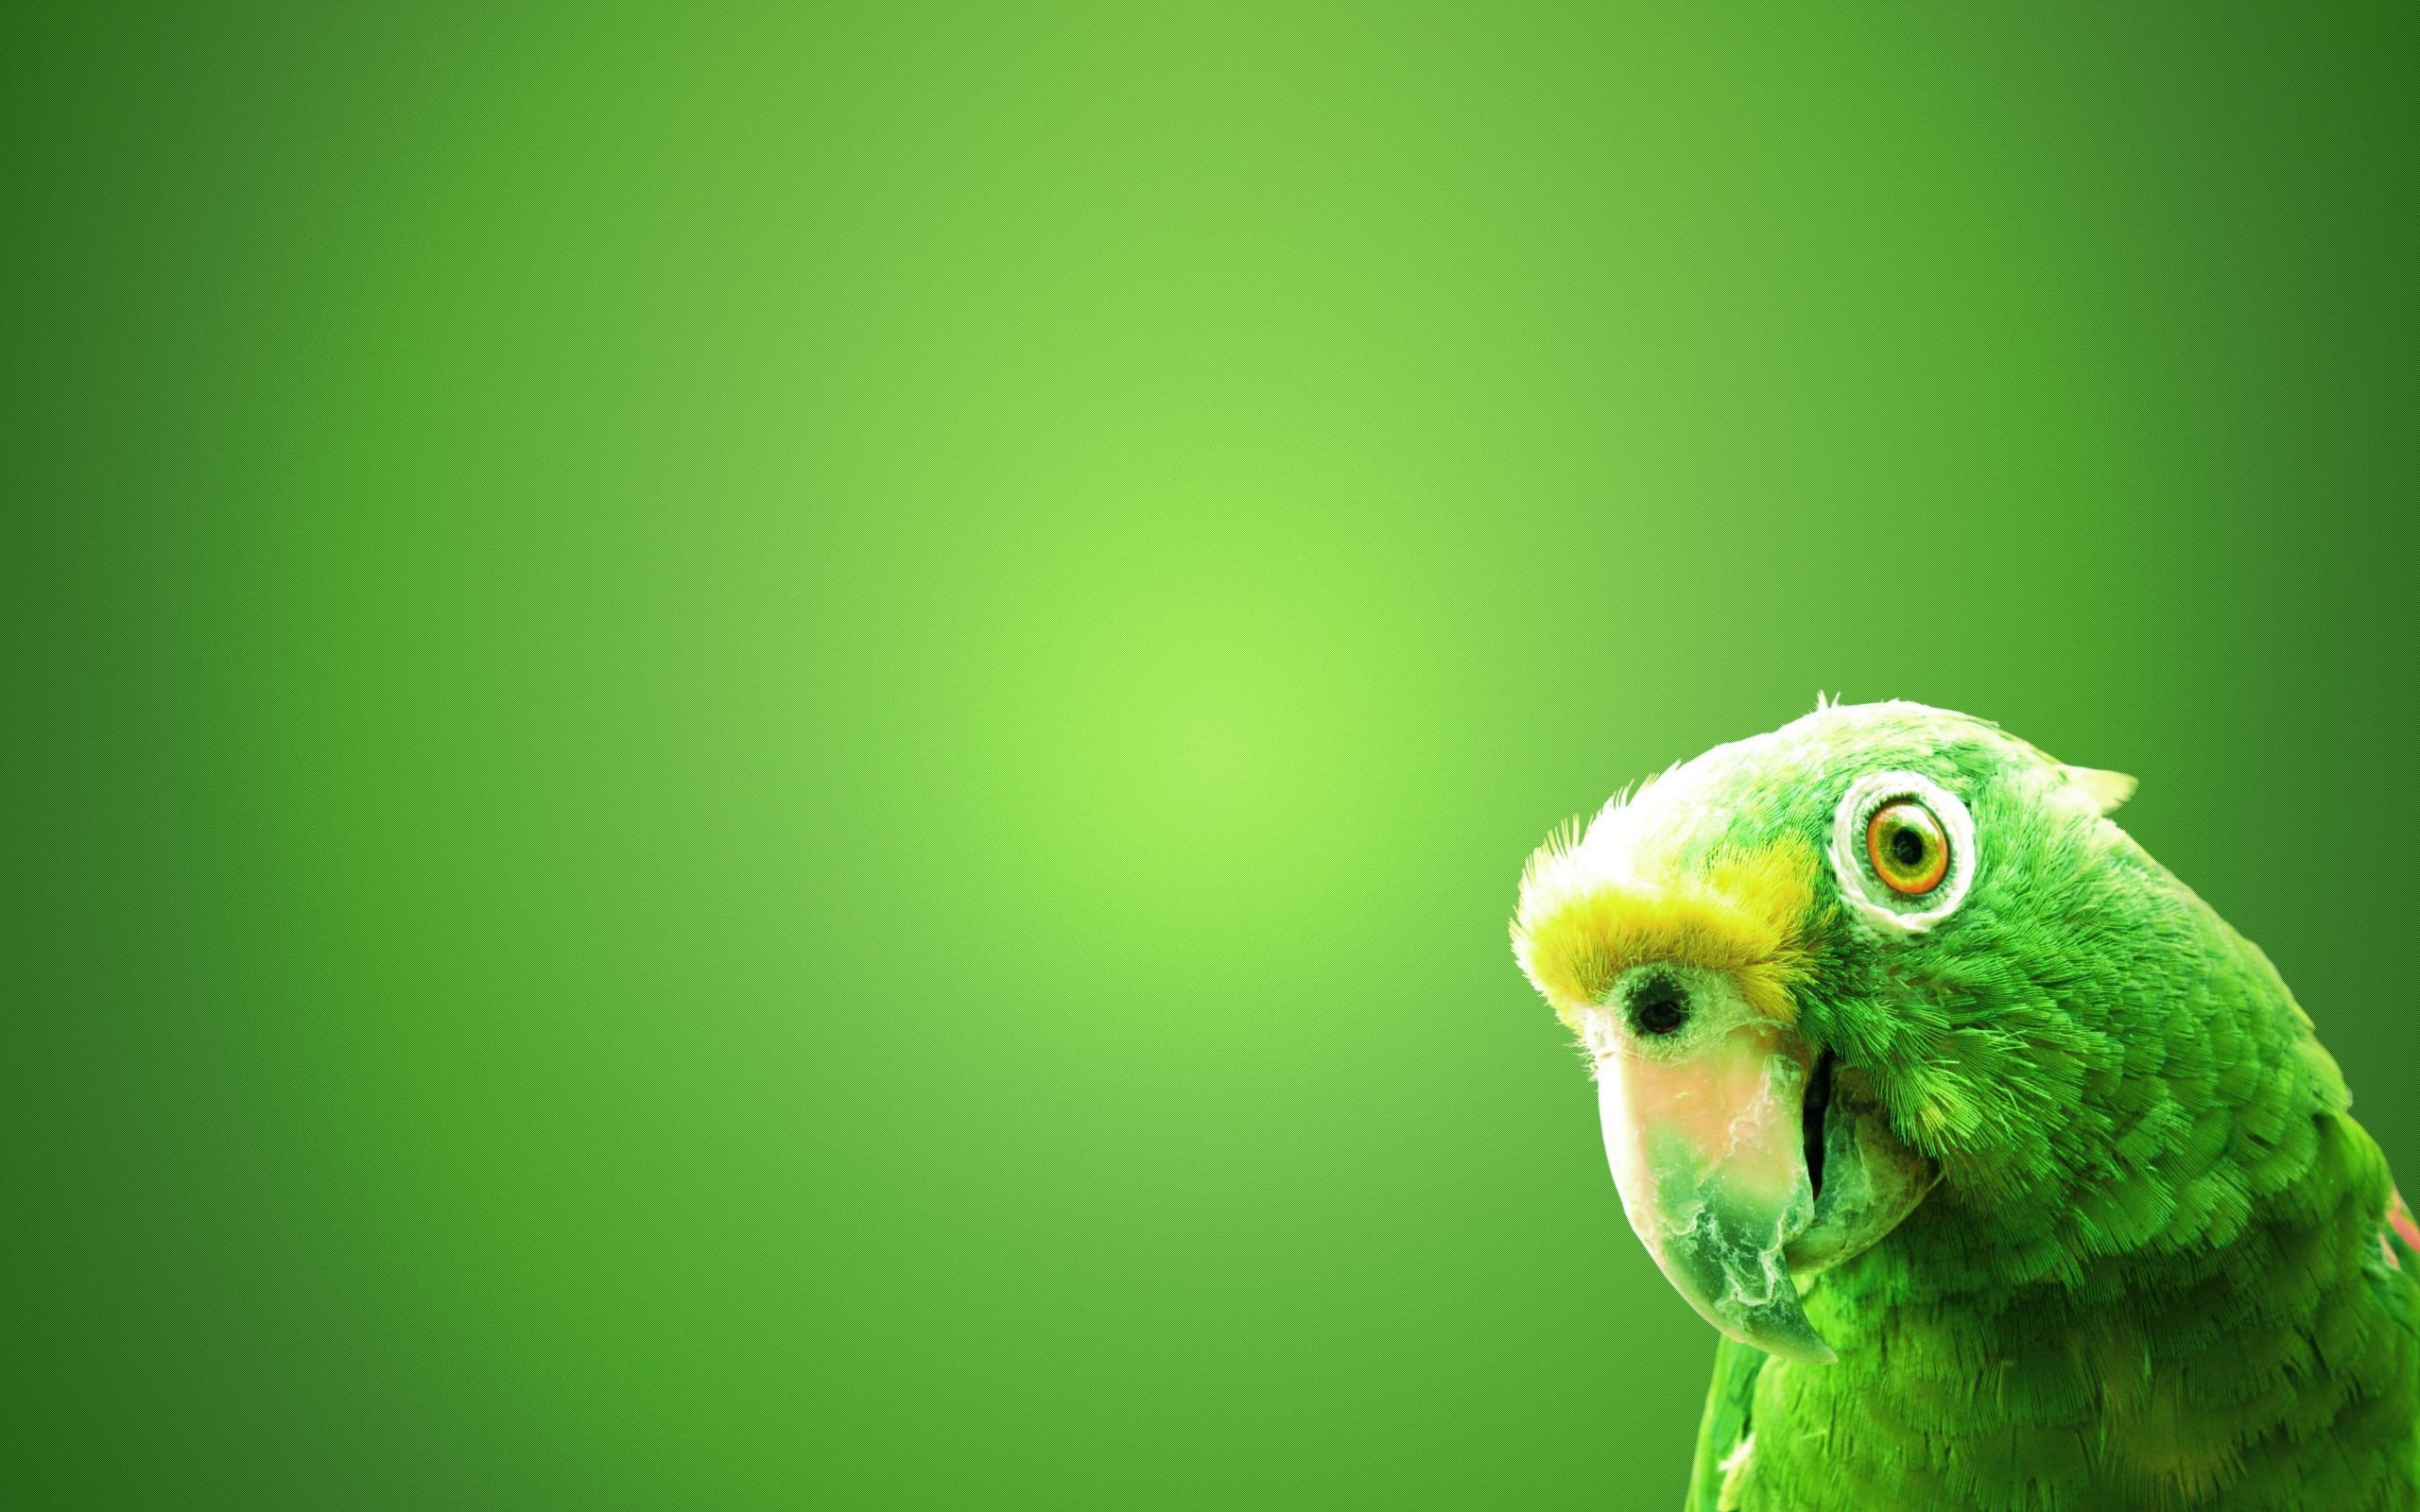 Download Green Parrot In Green Background Wallpapers Free By udhao.net